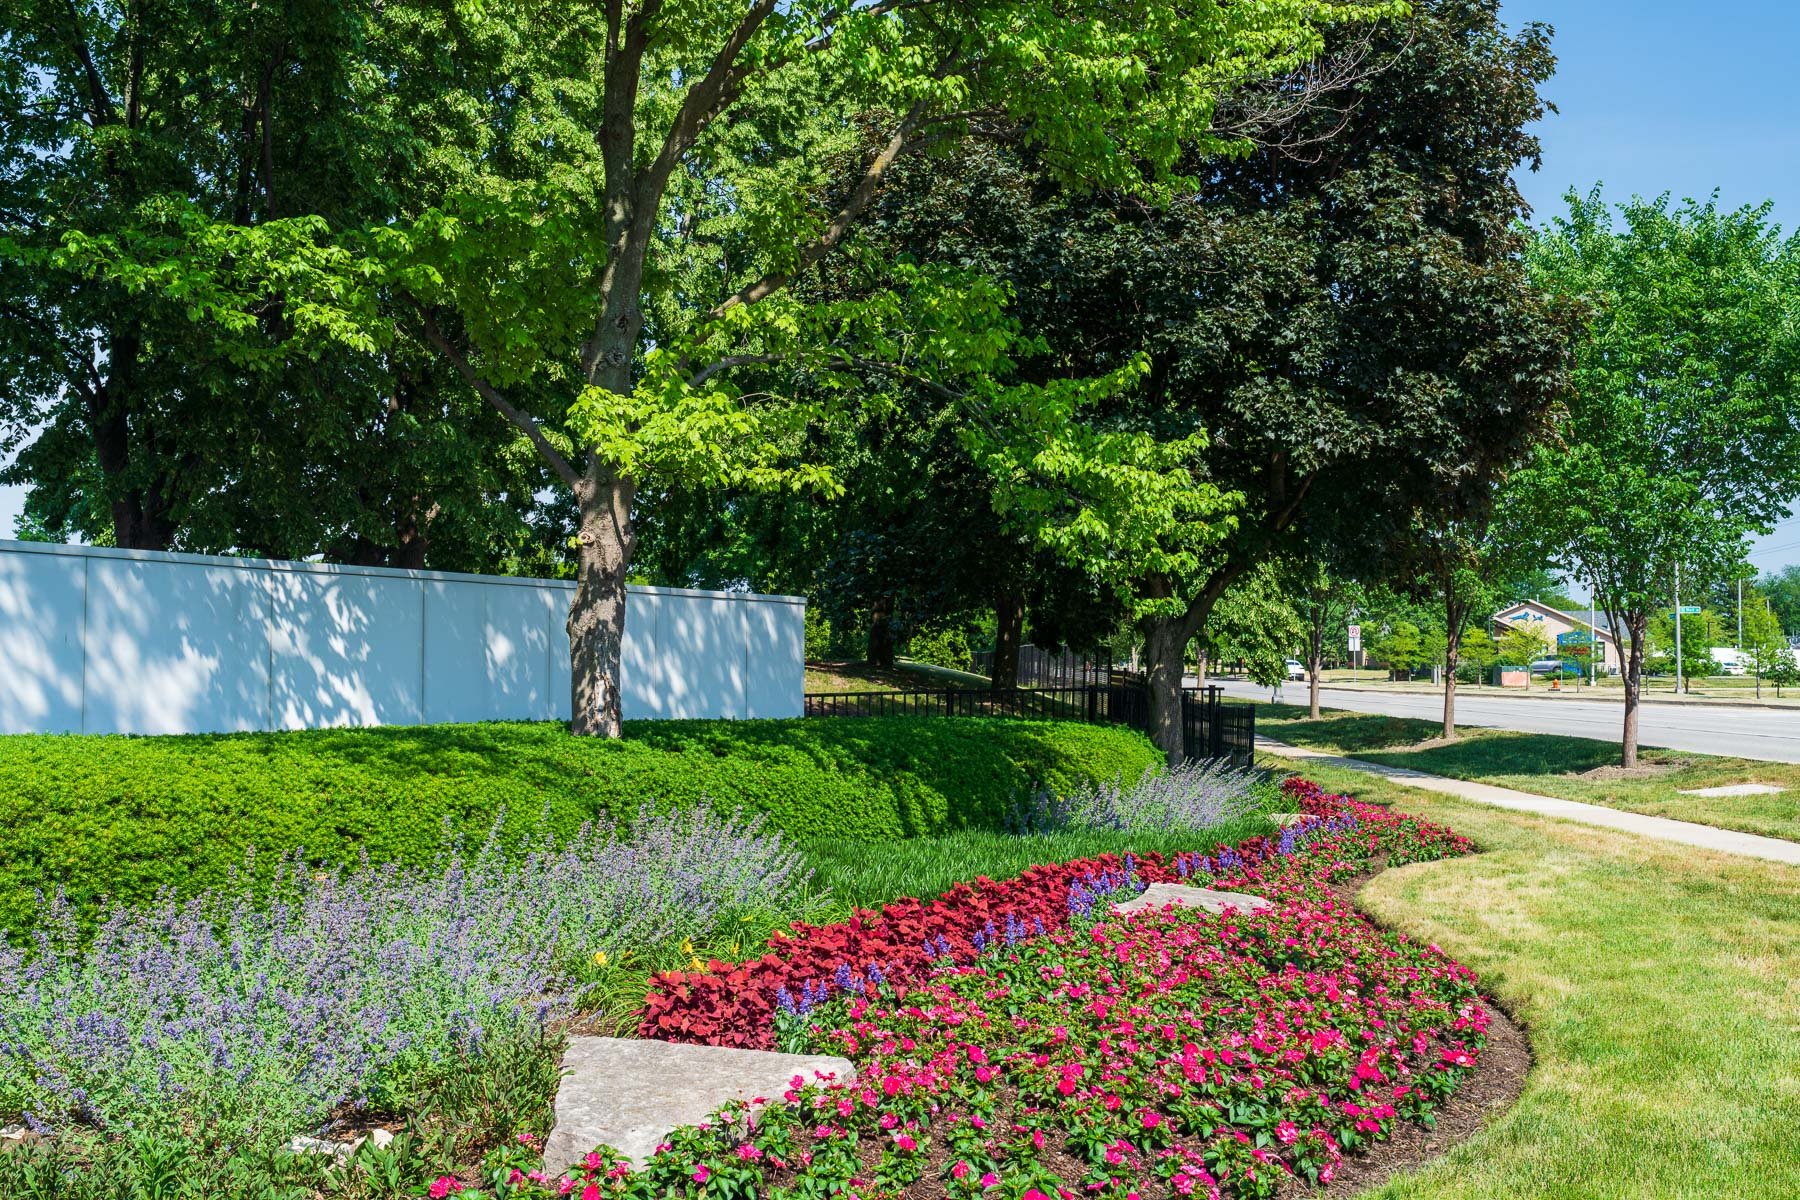 a commercial landscape planting bed with annuals, perennials, shrubs and shade trees